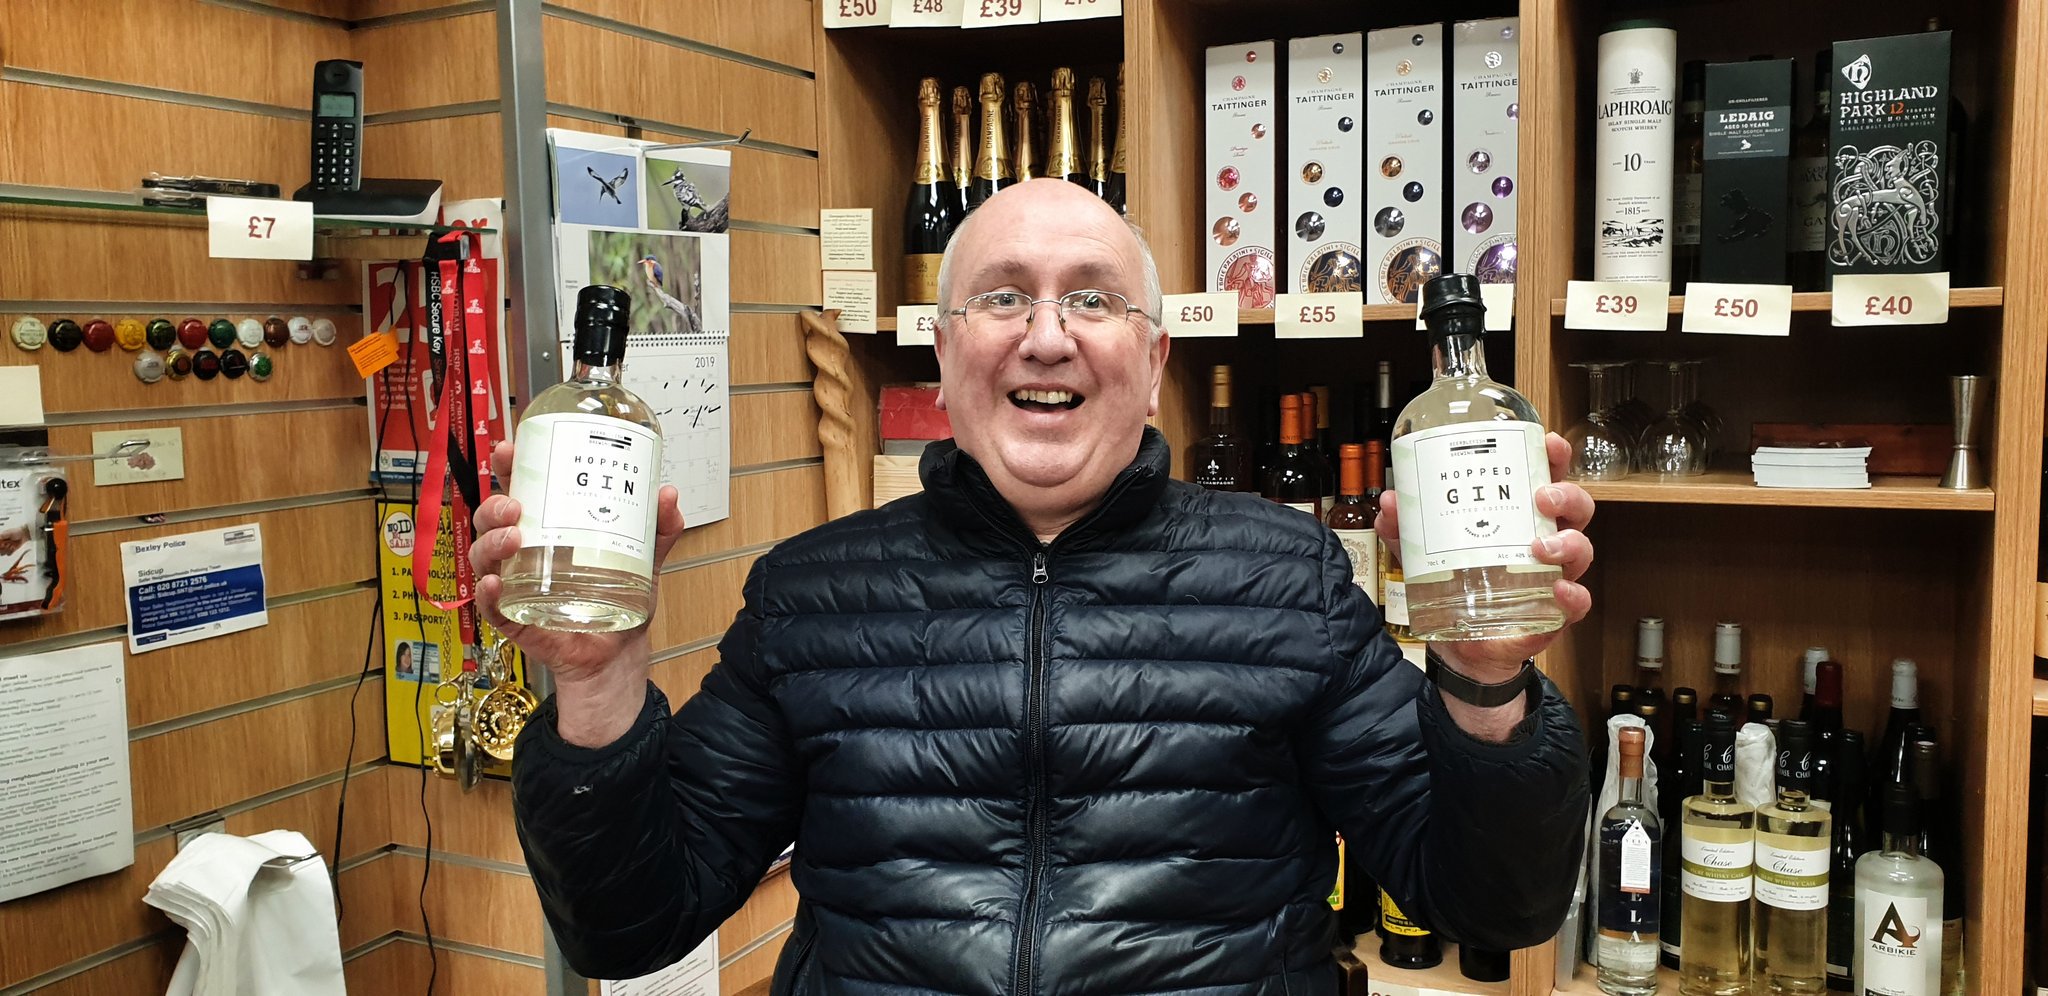 Bob Cuthbert from Lamorbey Wine, Sidcup